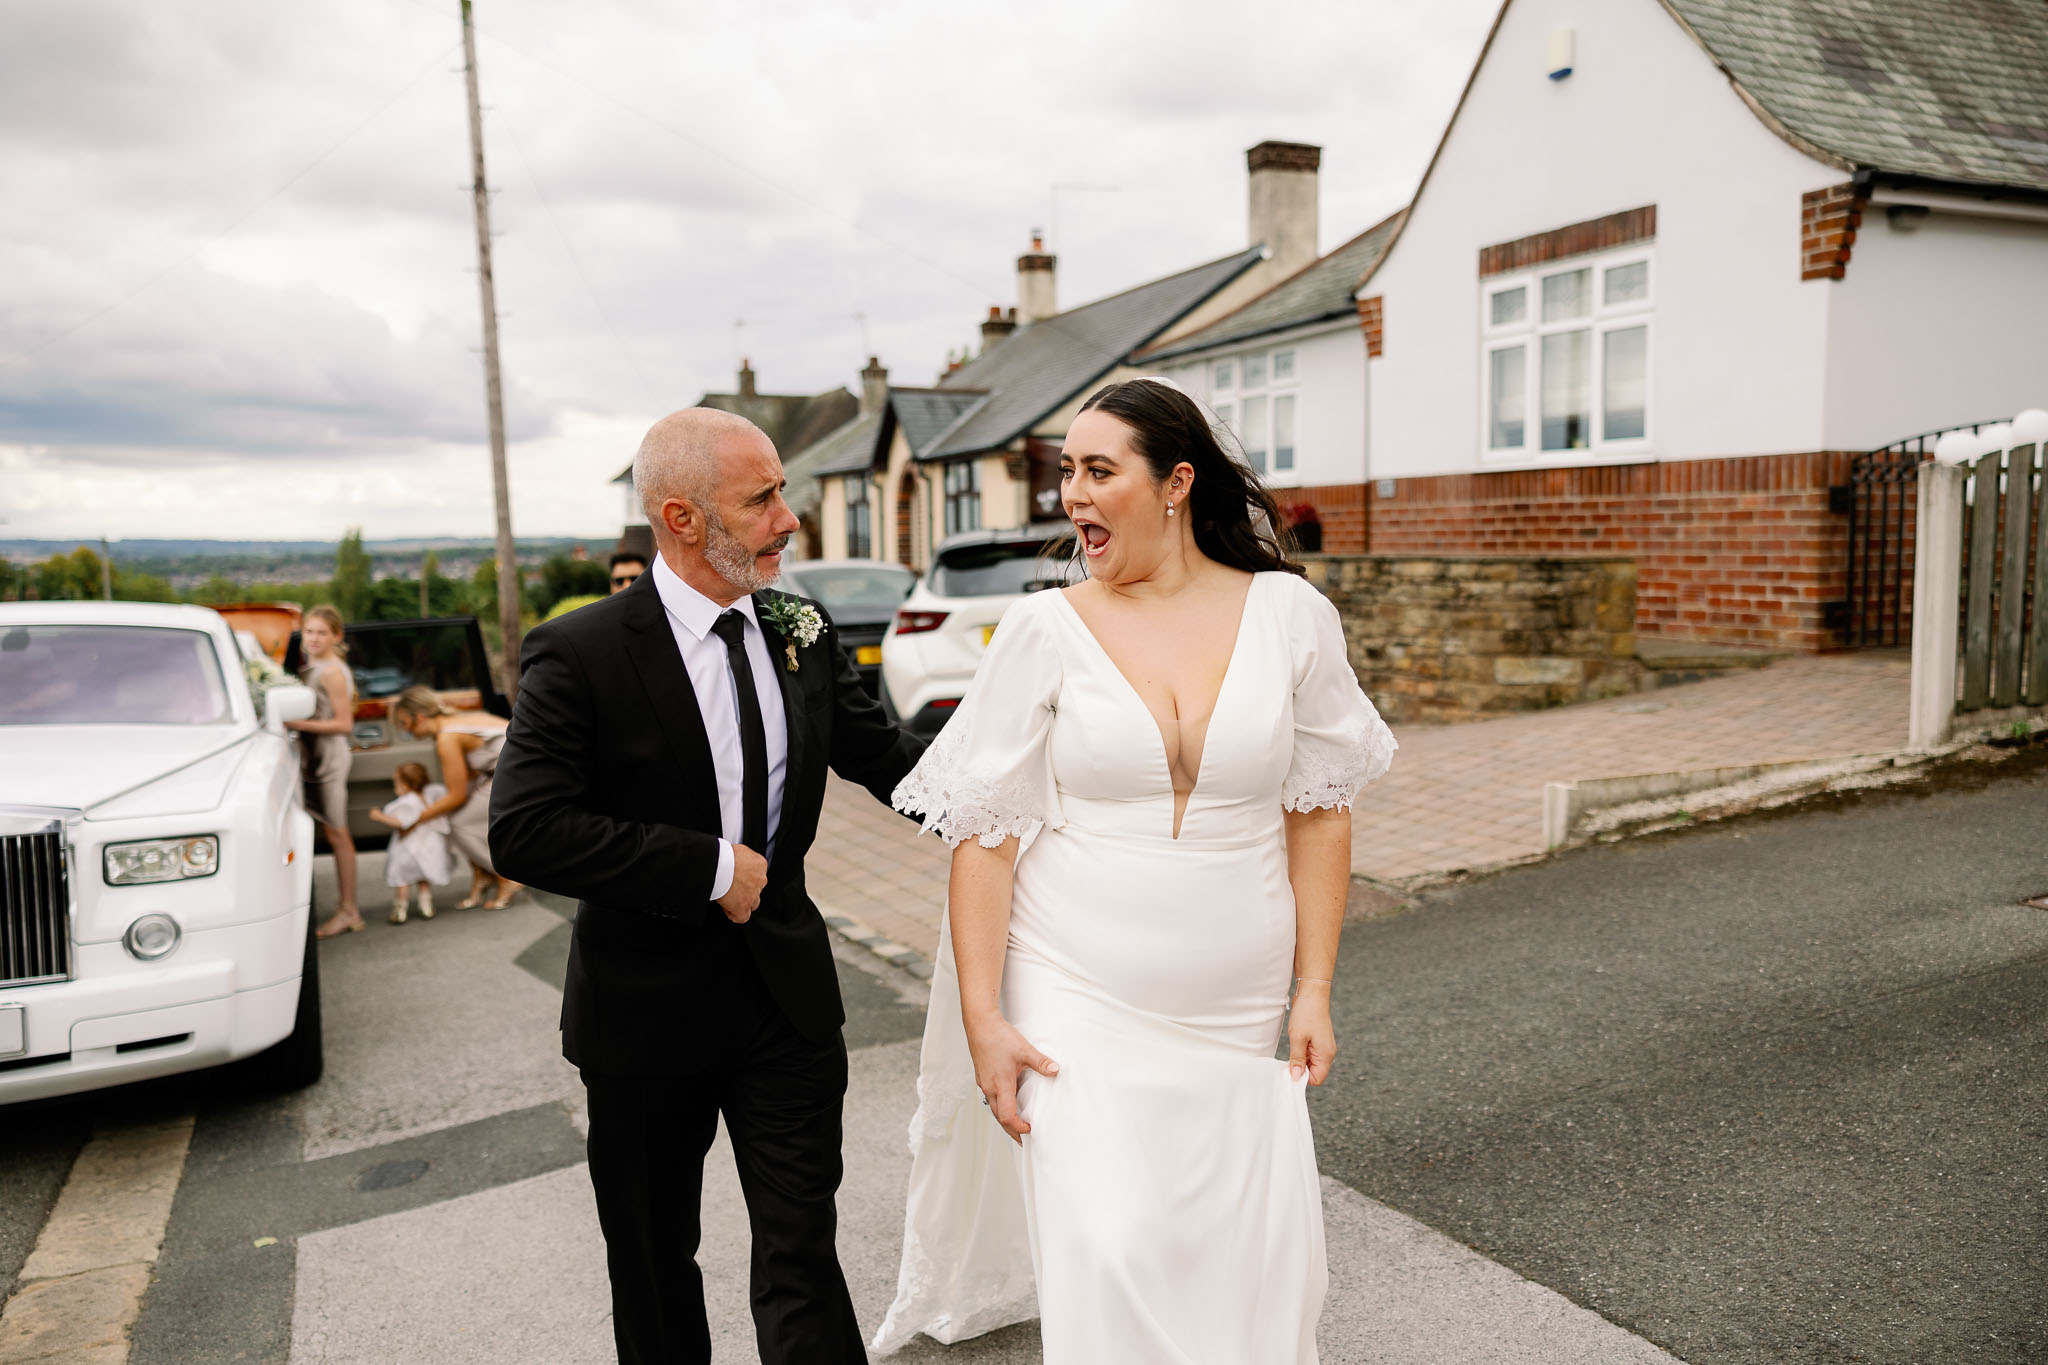 Fun Pictures of a bride and her father